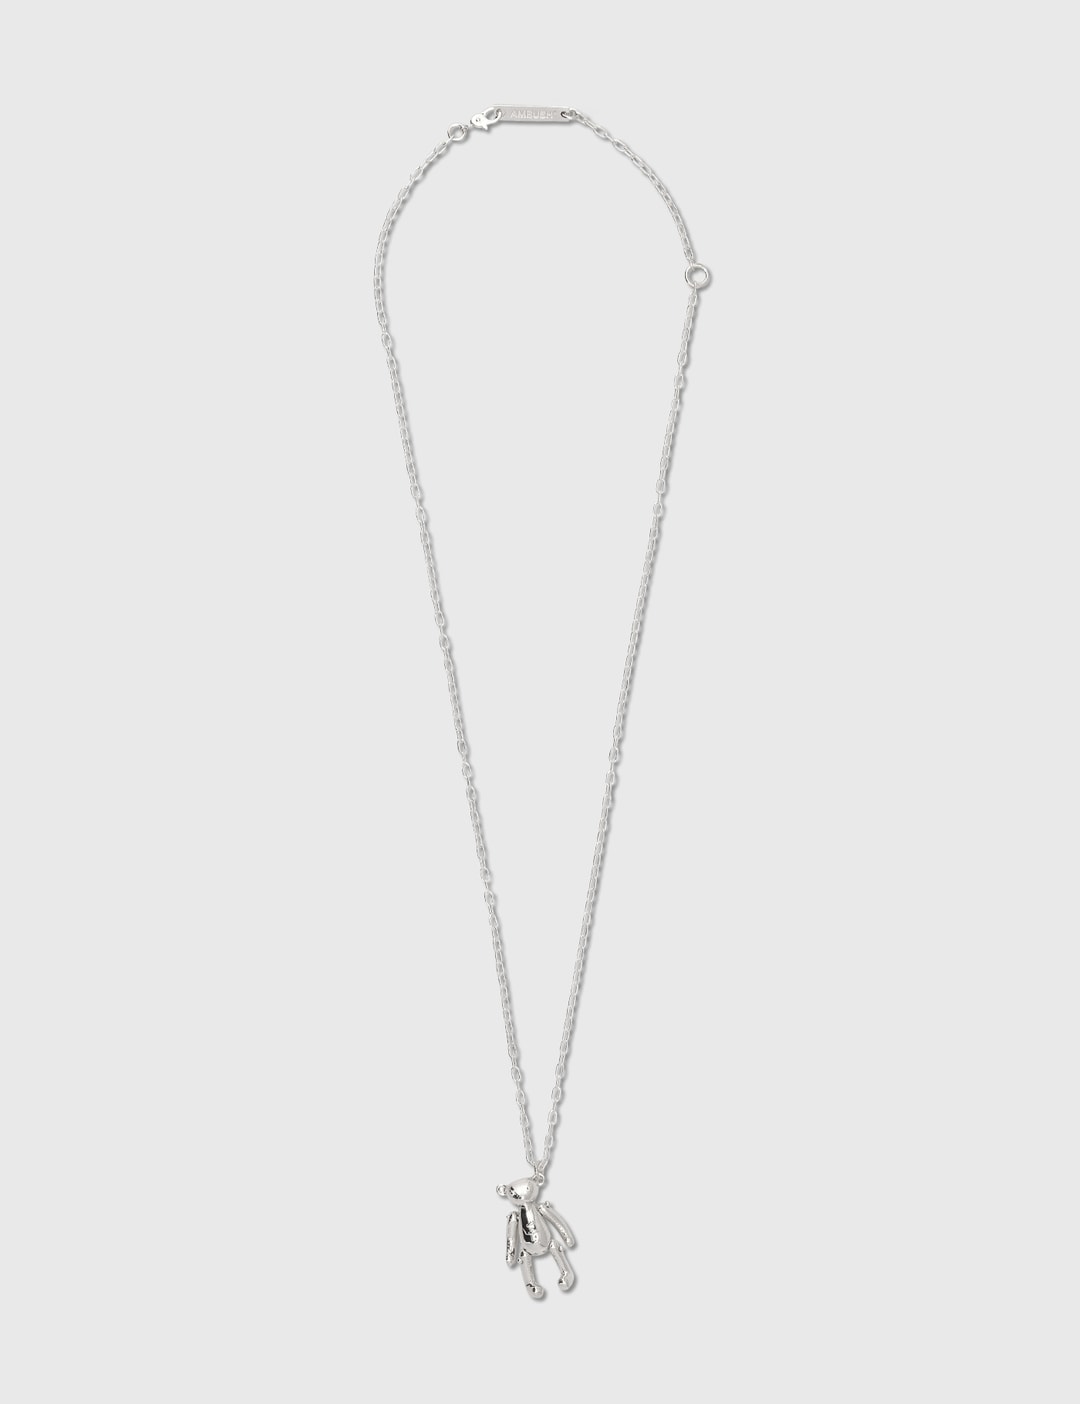 TEDDY BEAR CHARM NECKLACE Placeholder Image